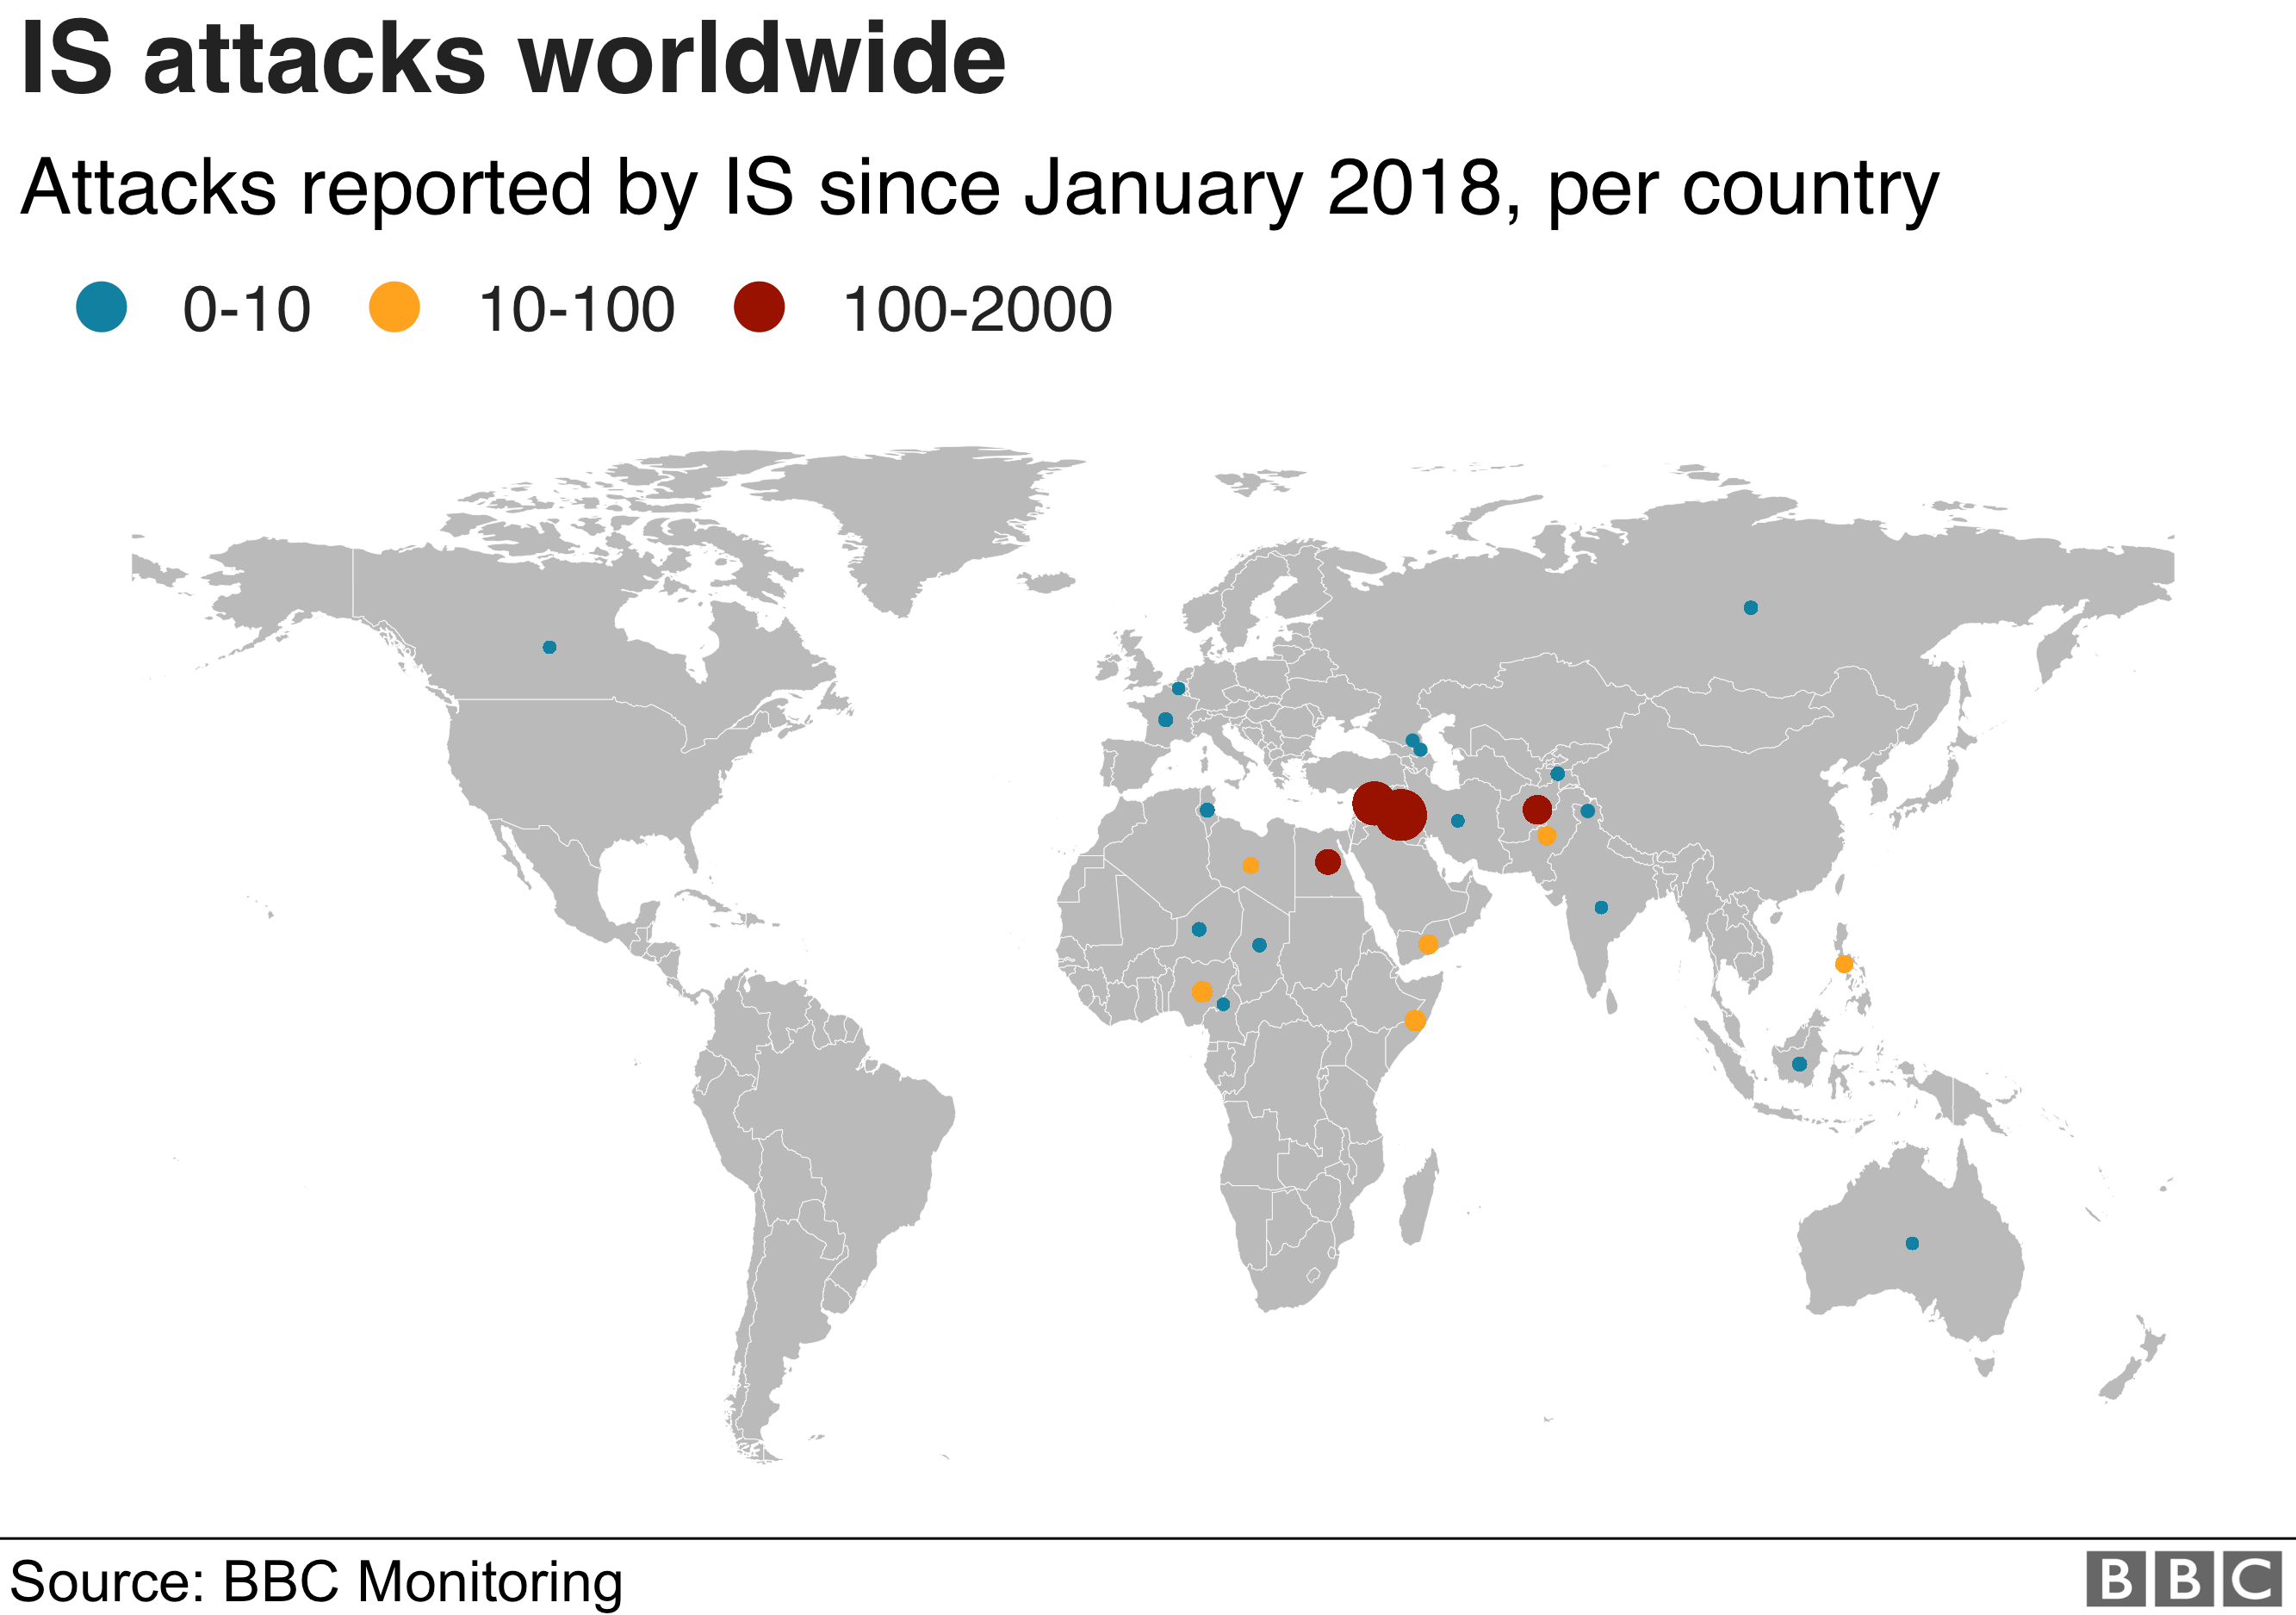 Map showing number of attacks per country since January 2018